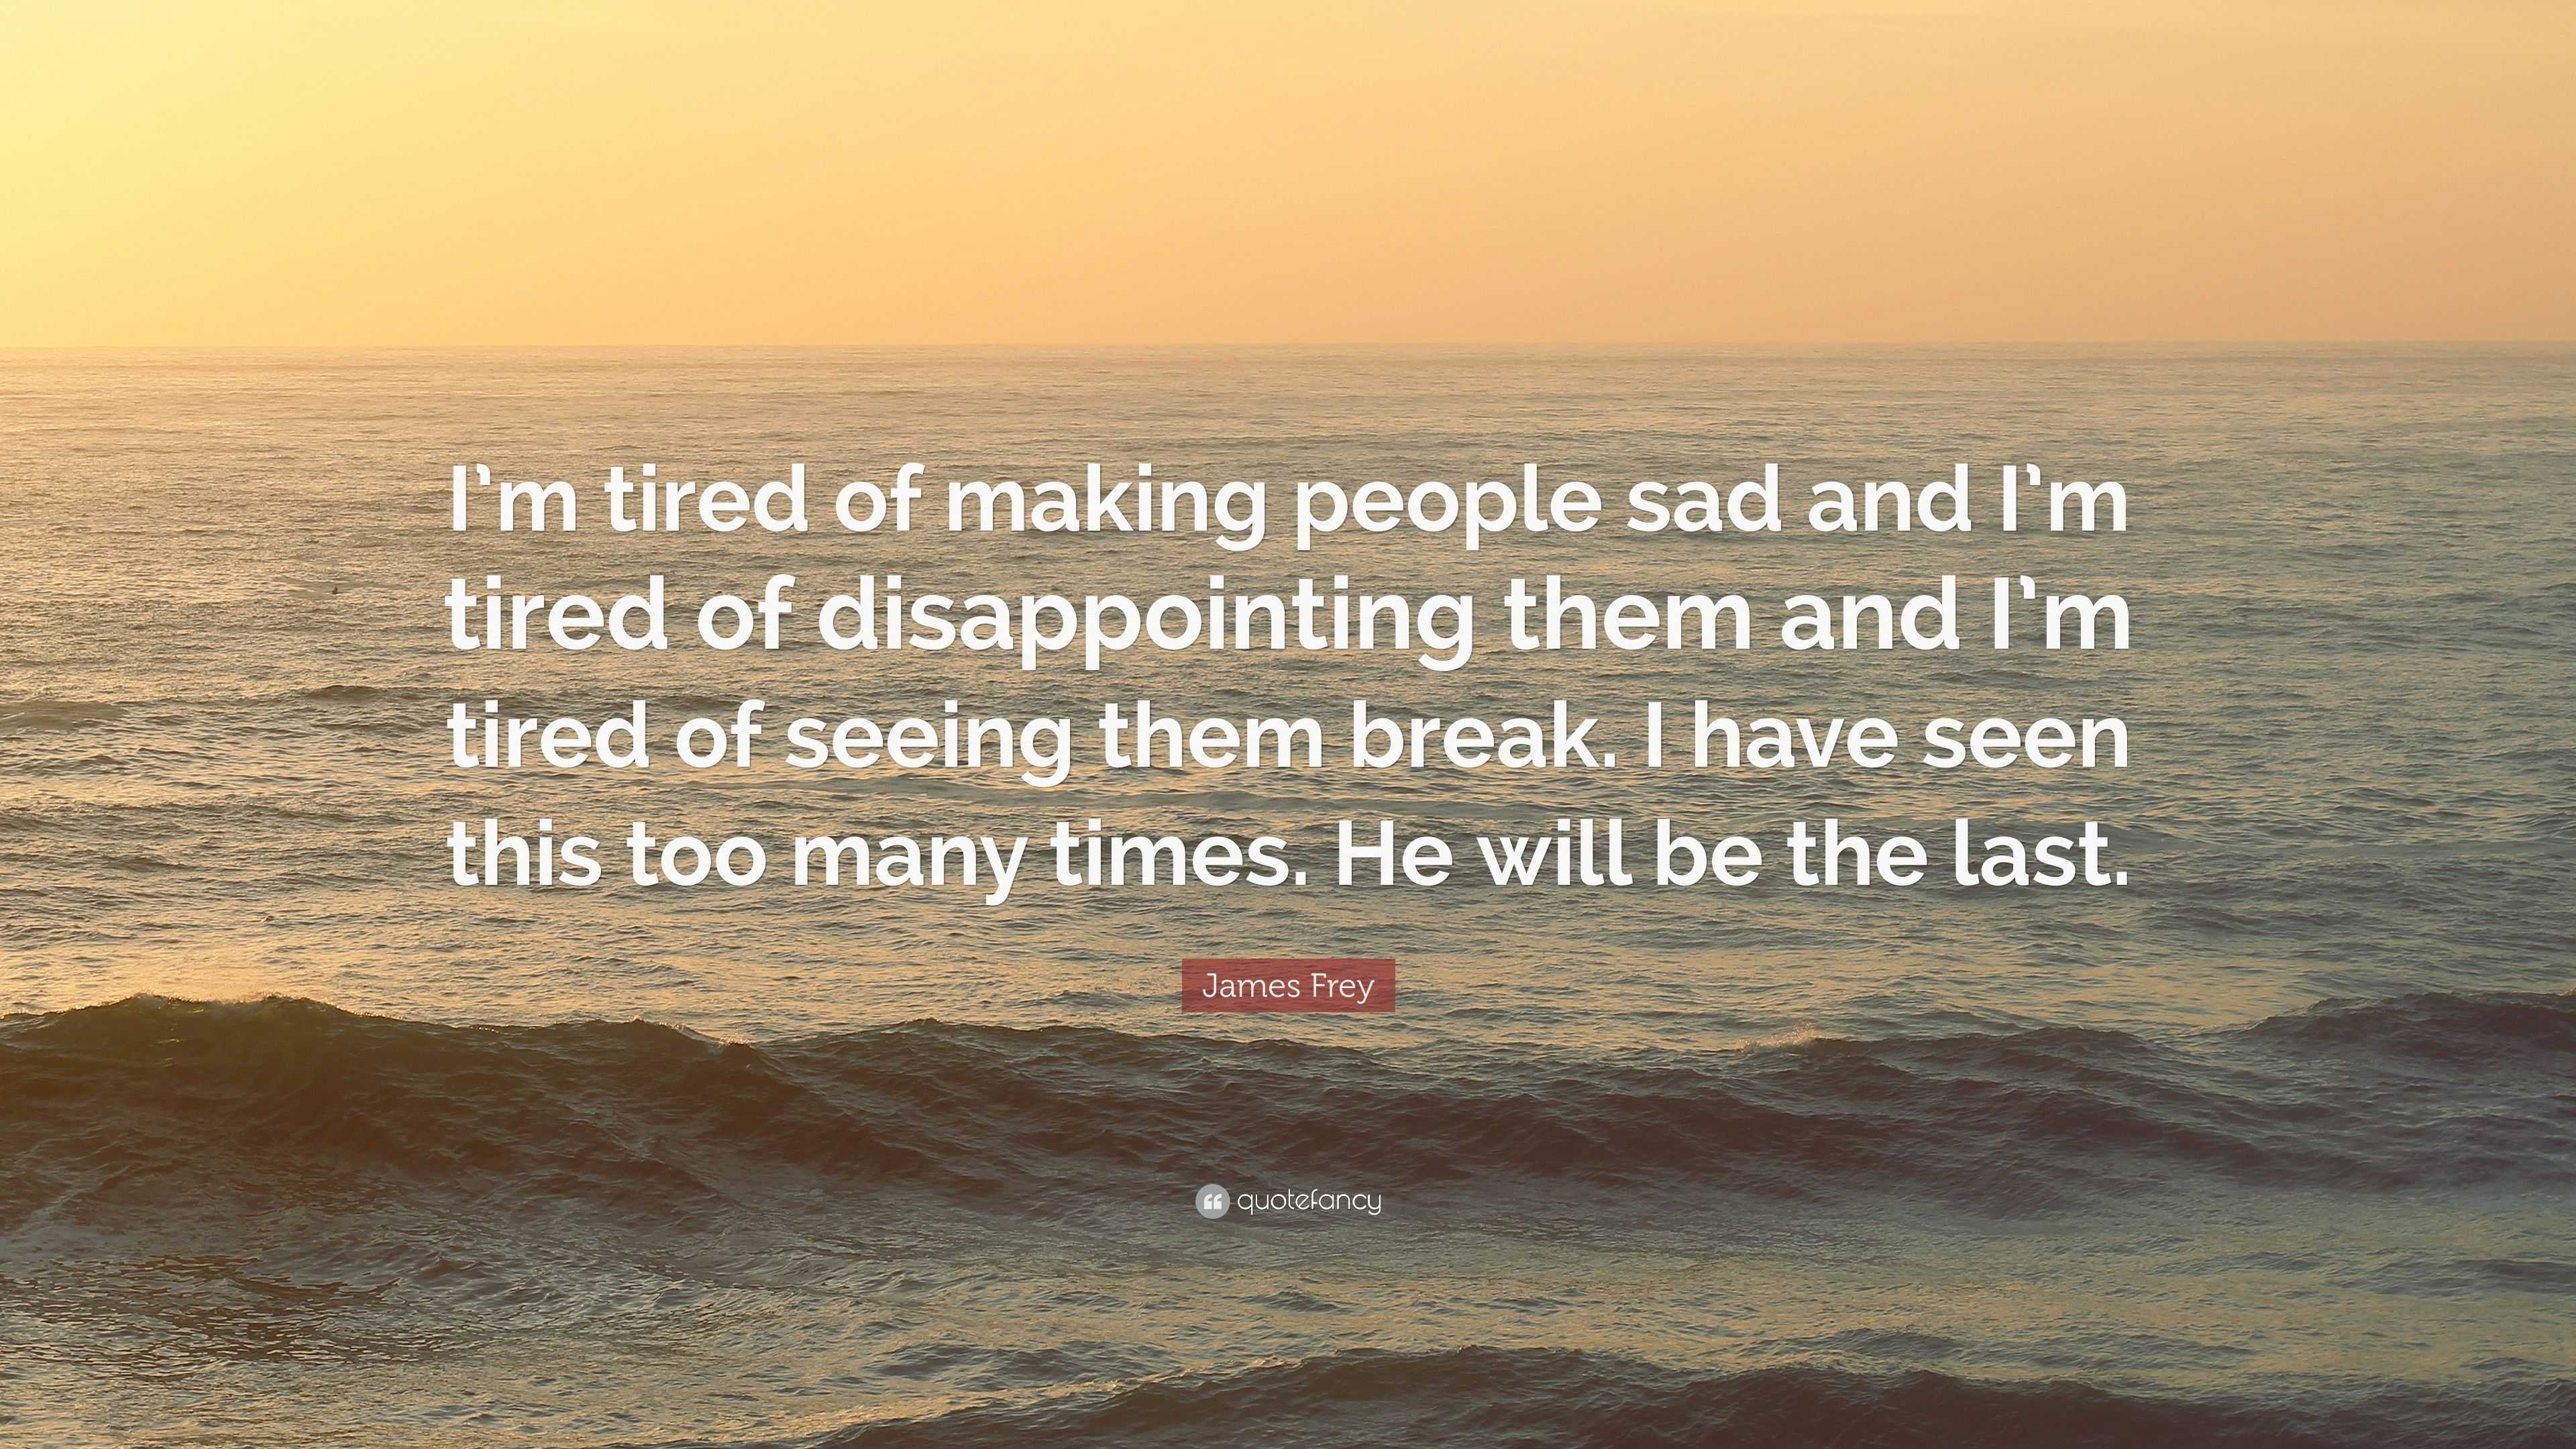 James Frey Quote: “I’m tired of making people sad and I’m tired of ...